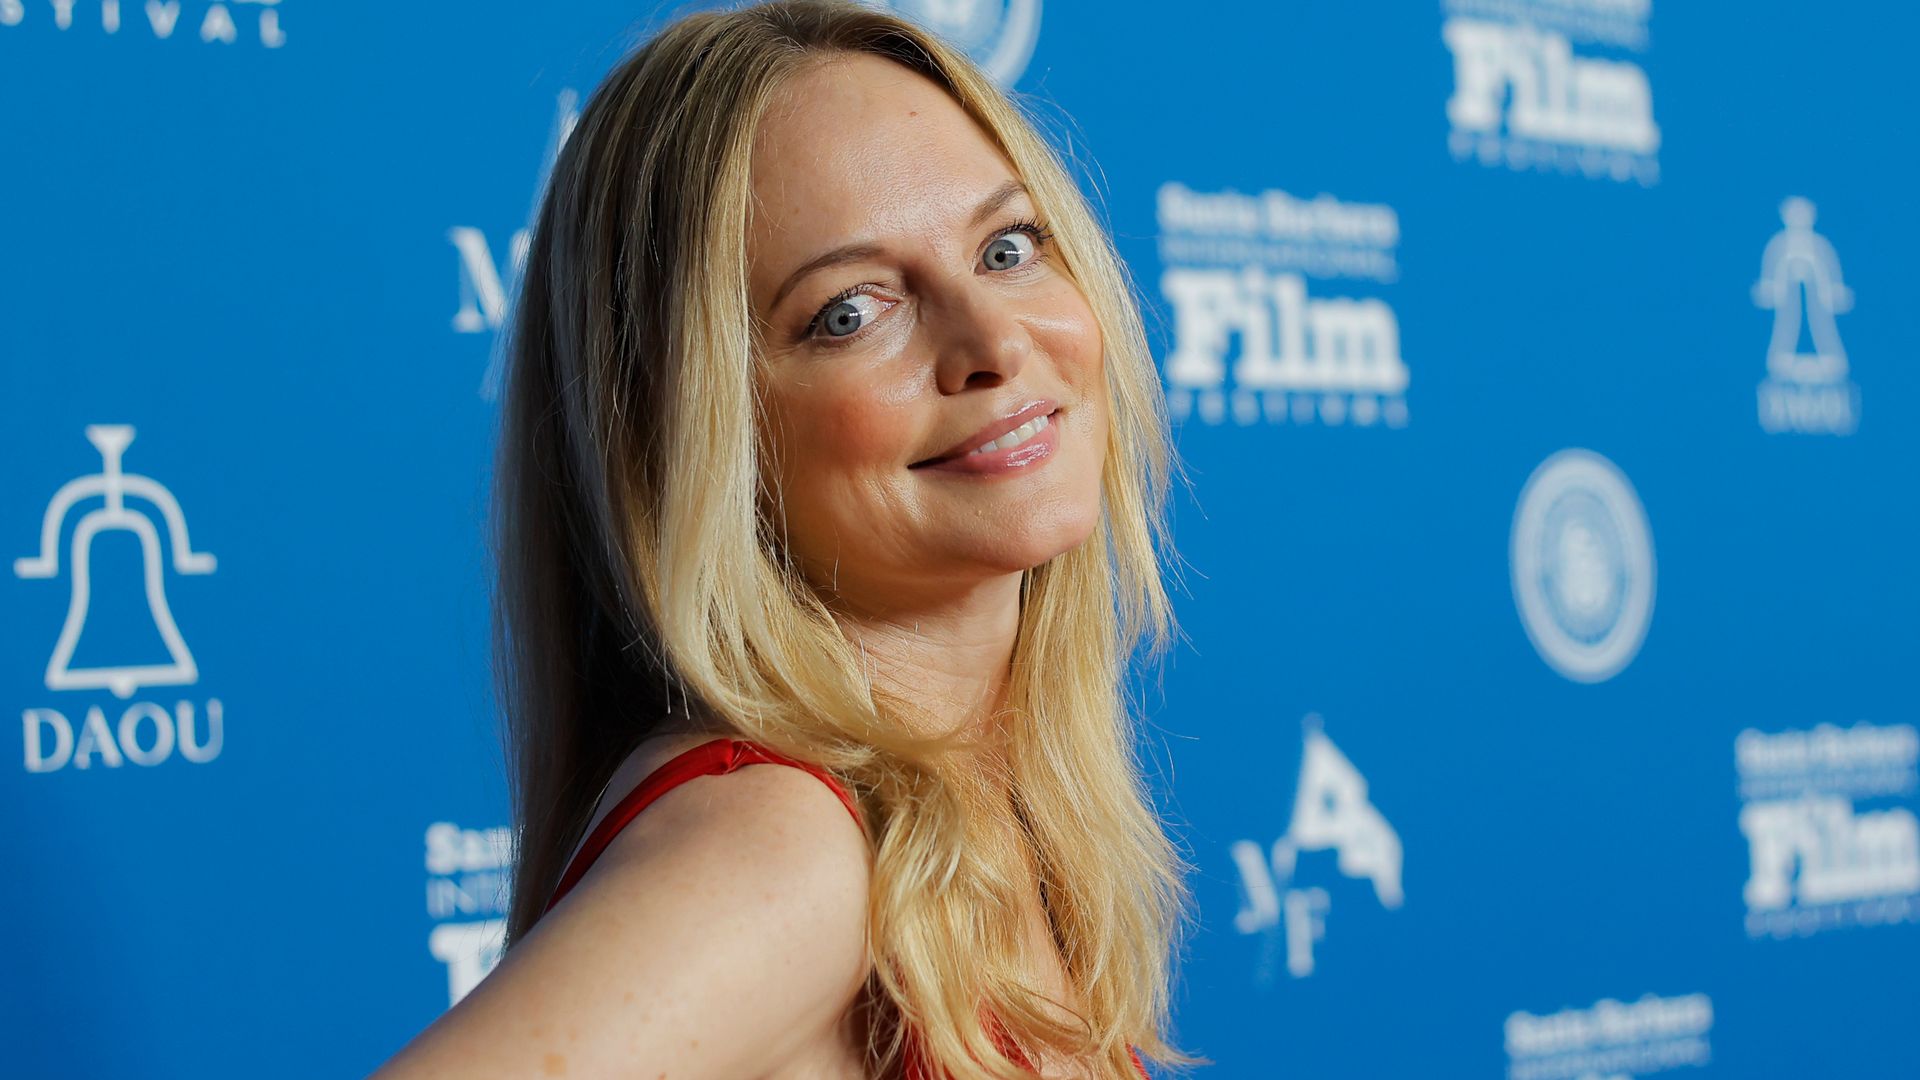 Heather Graham is a blonde bombshell in striking red dress